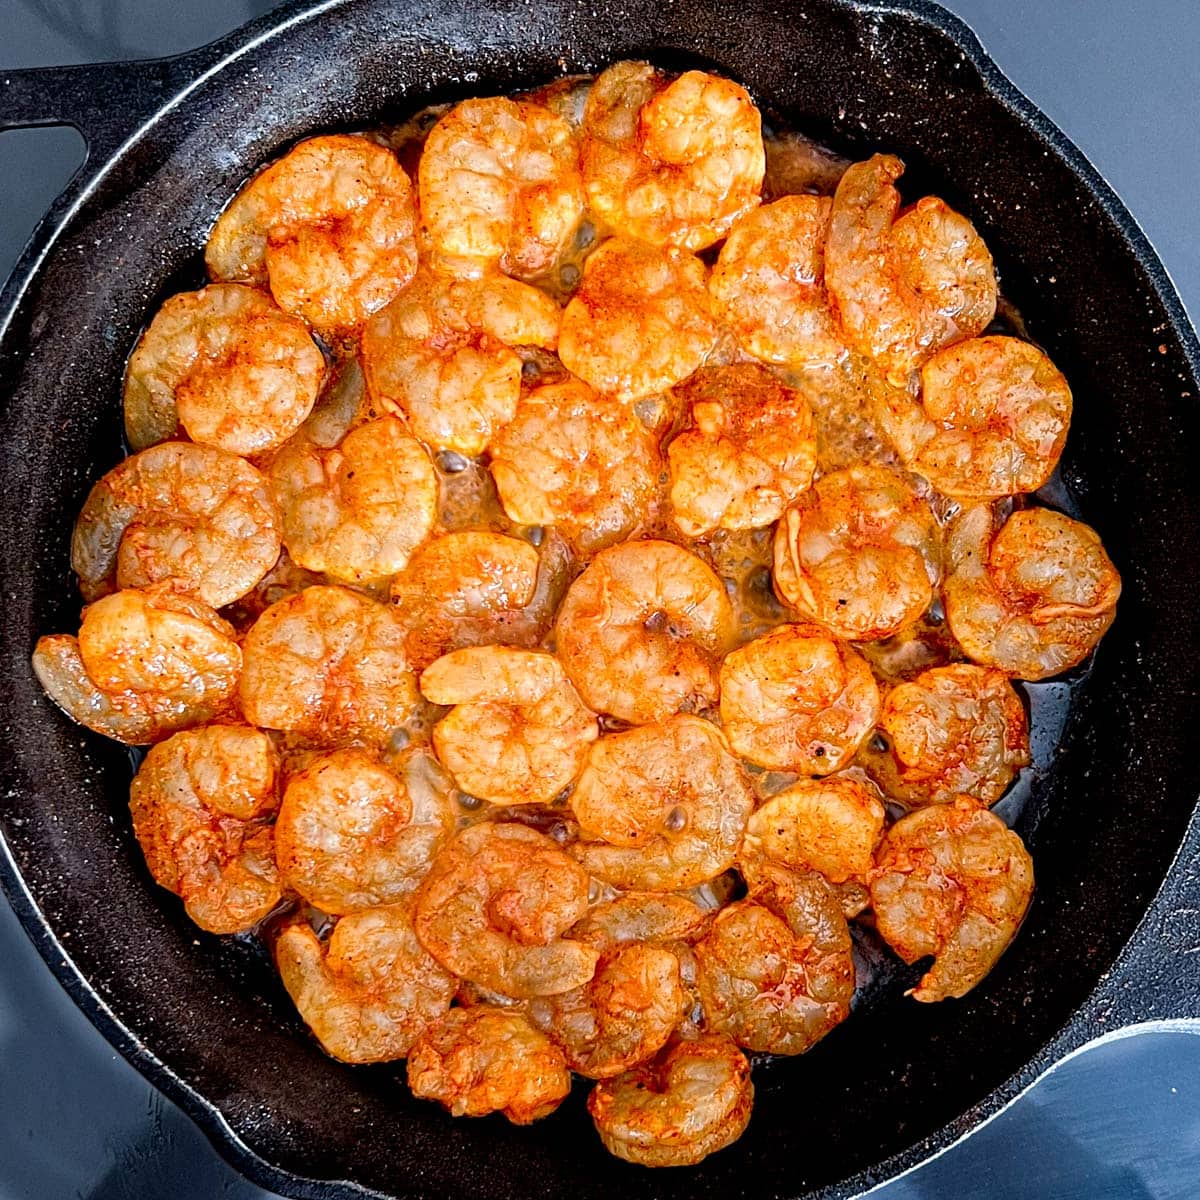 Overhead shot of shrimp cooking in a cast iron skillet